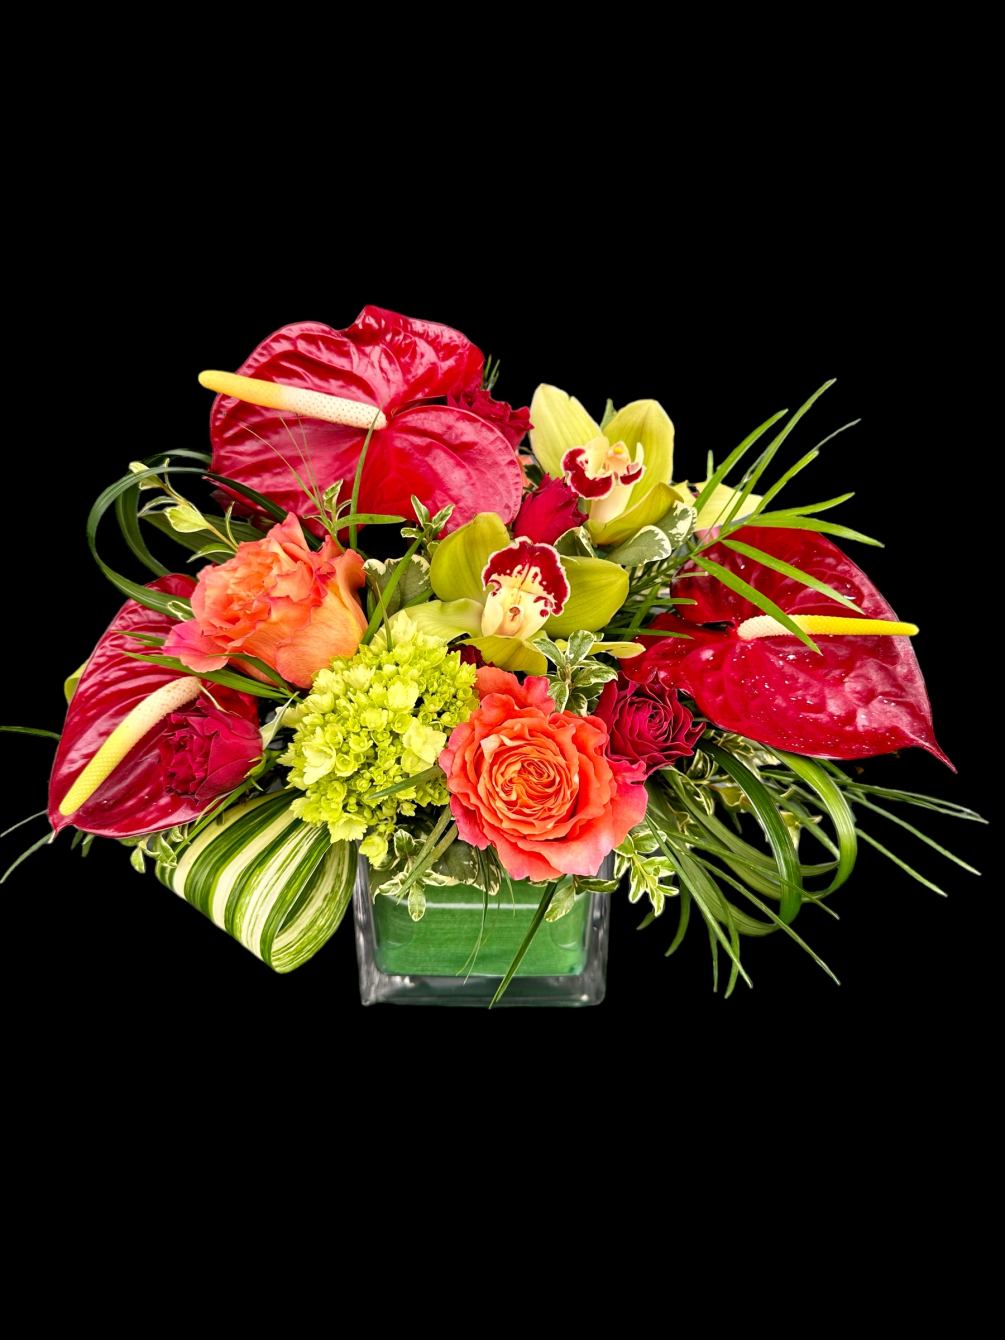 Beautiful red anthurium mixed with a passion of multi colored orchids, roses